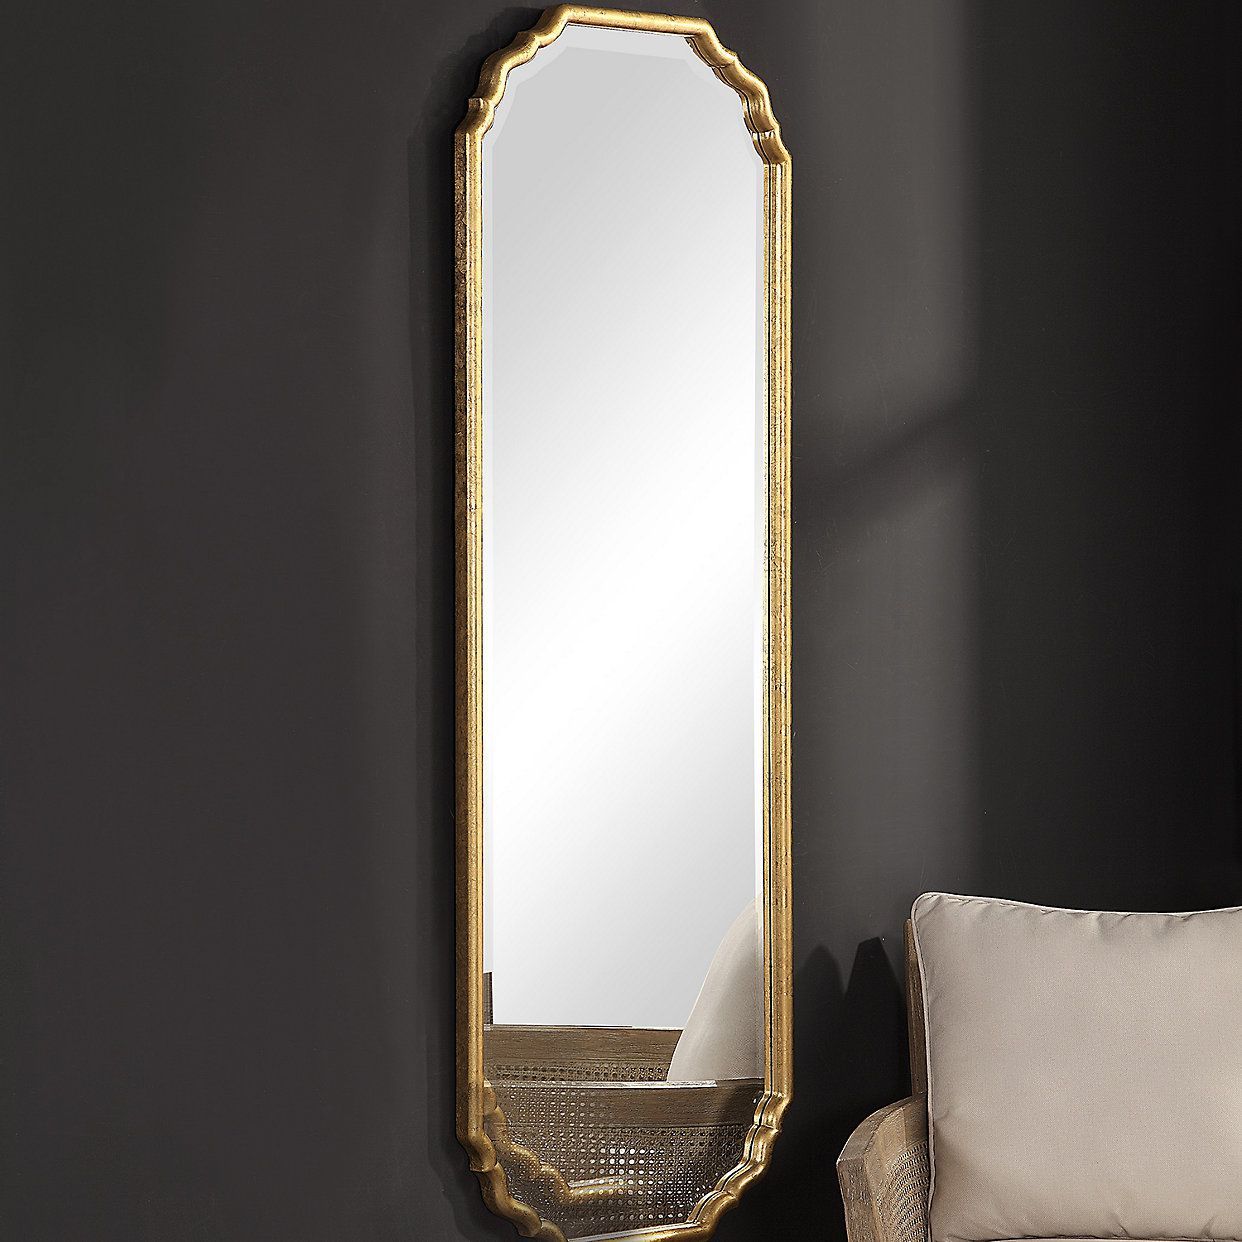 Elegant Curved Corners Metallic Gold Leaf Finish Wall Mirror | Mirror Throughout Gold Curved Wall Mirrors (View 10 of 15)